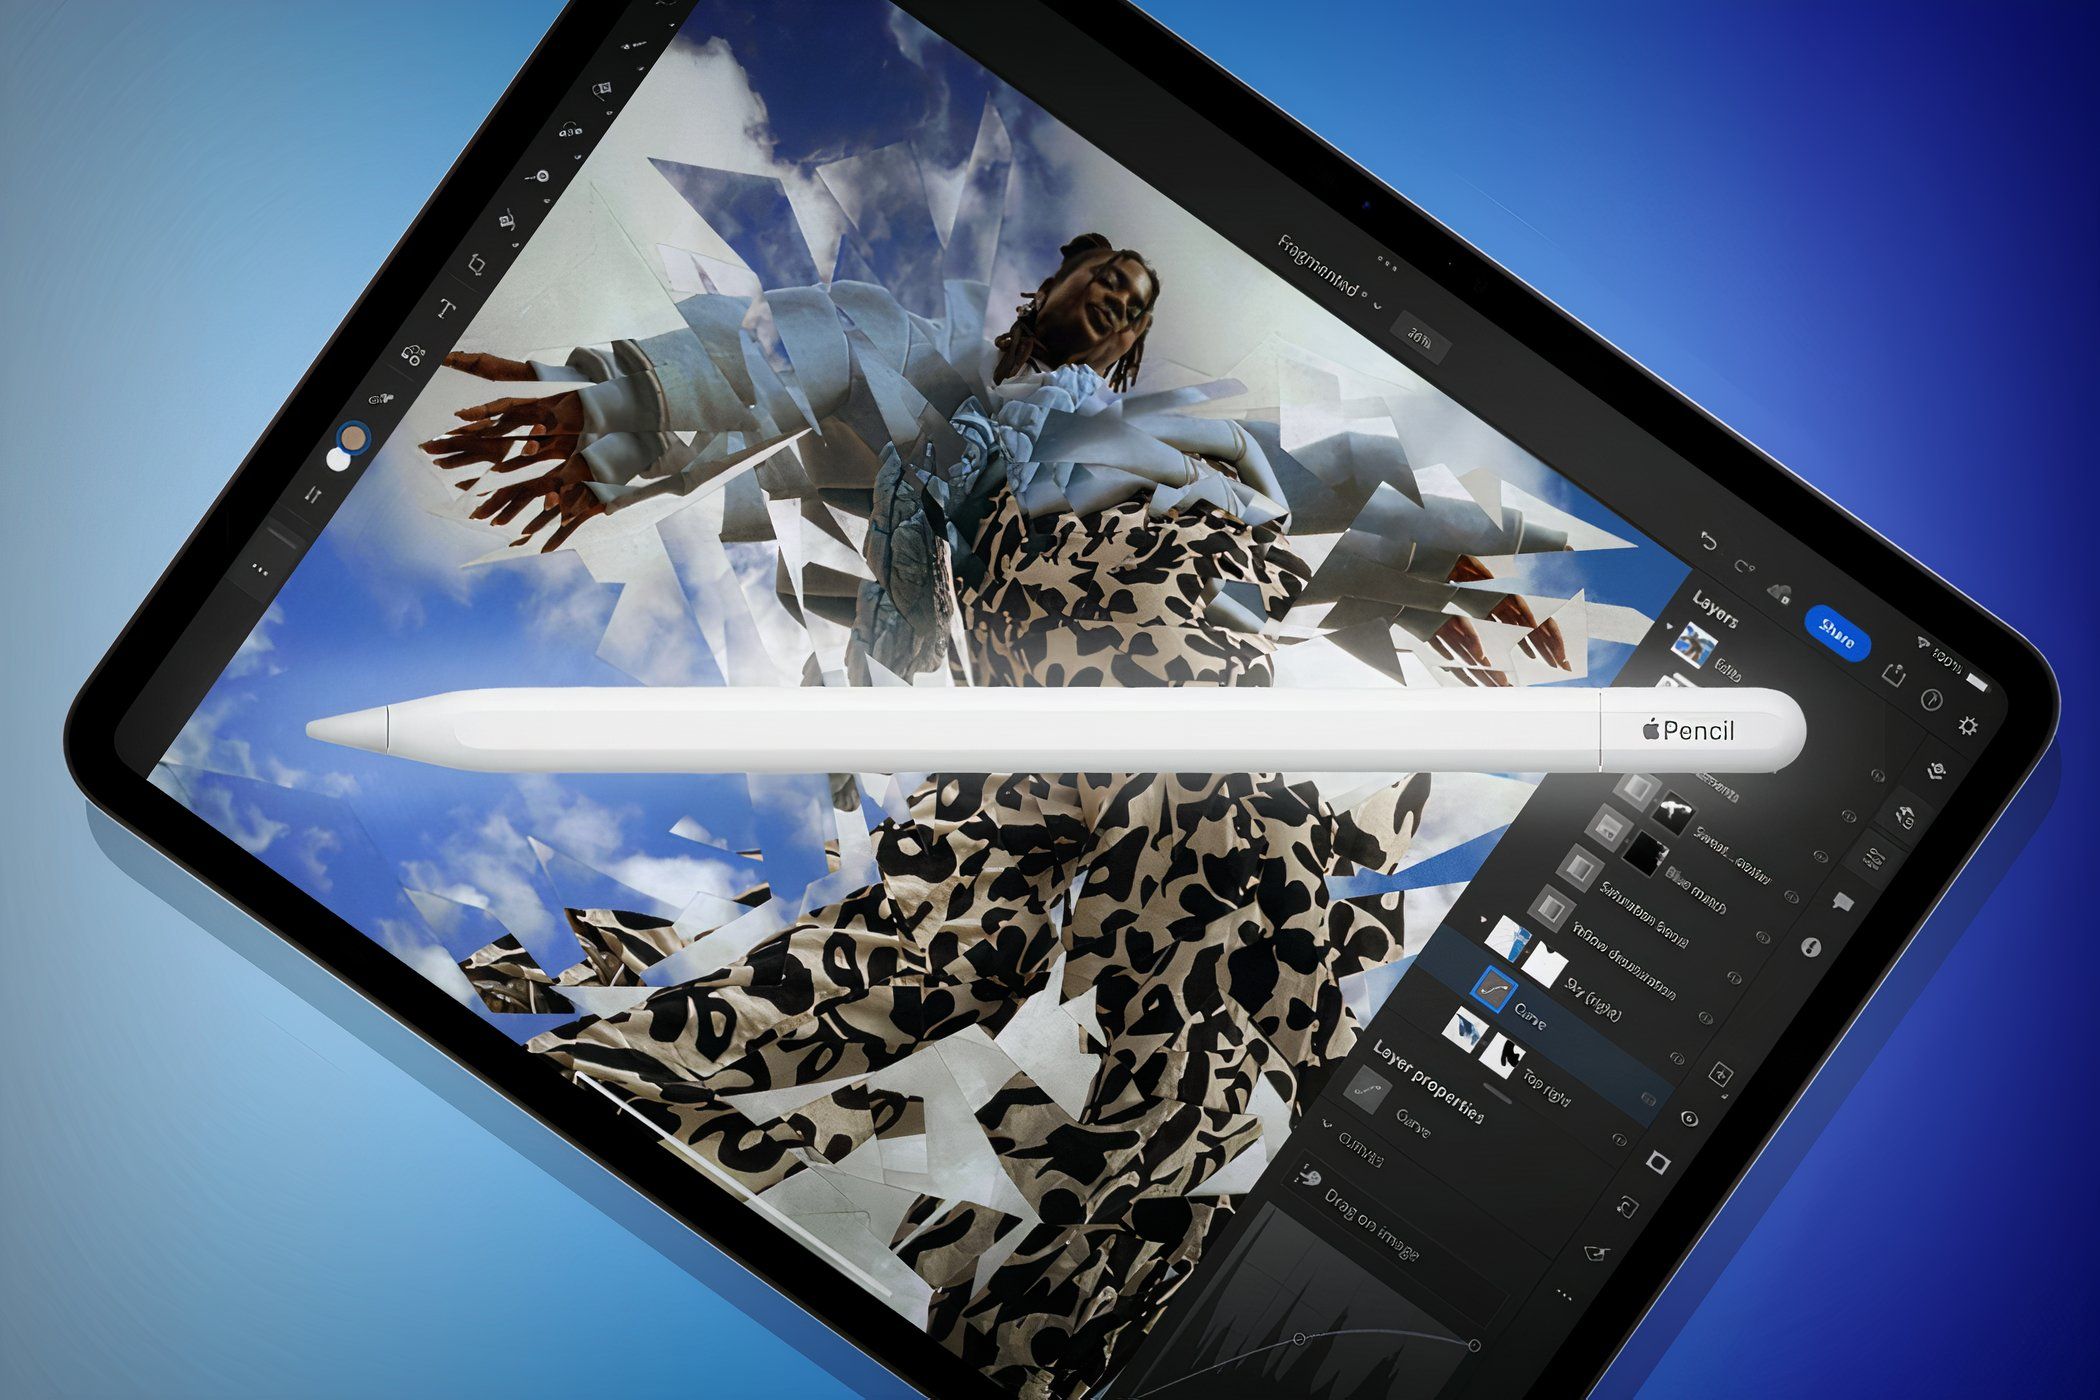 An iPad displaying digital artwork with an Apple Pencil, showcasing creative design capabilities and precision editing on a high-resolution screen